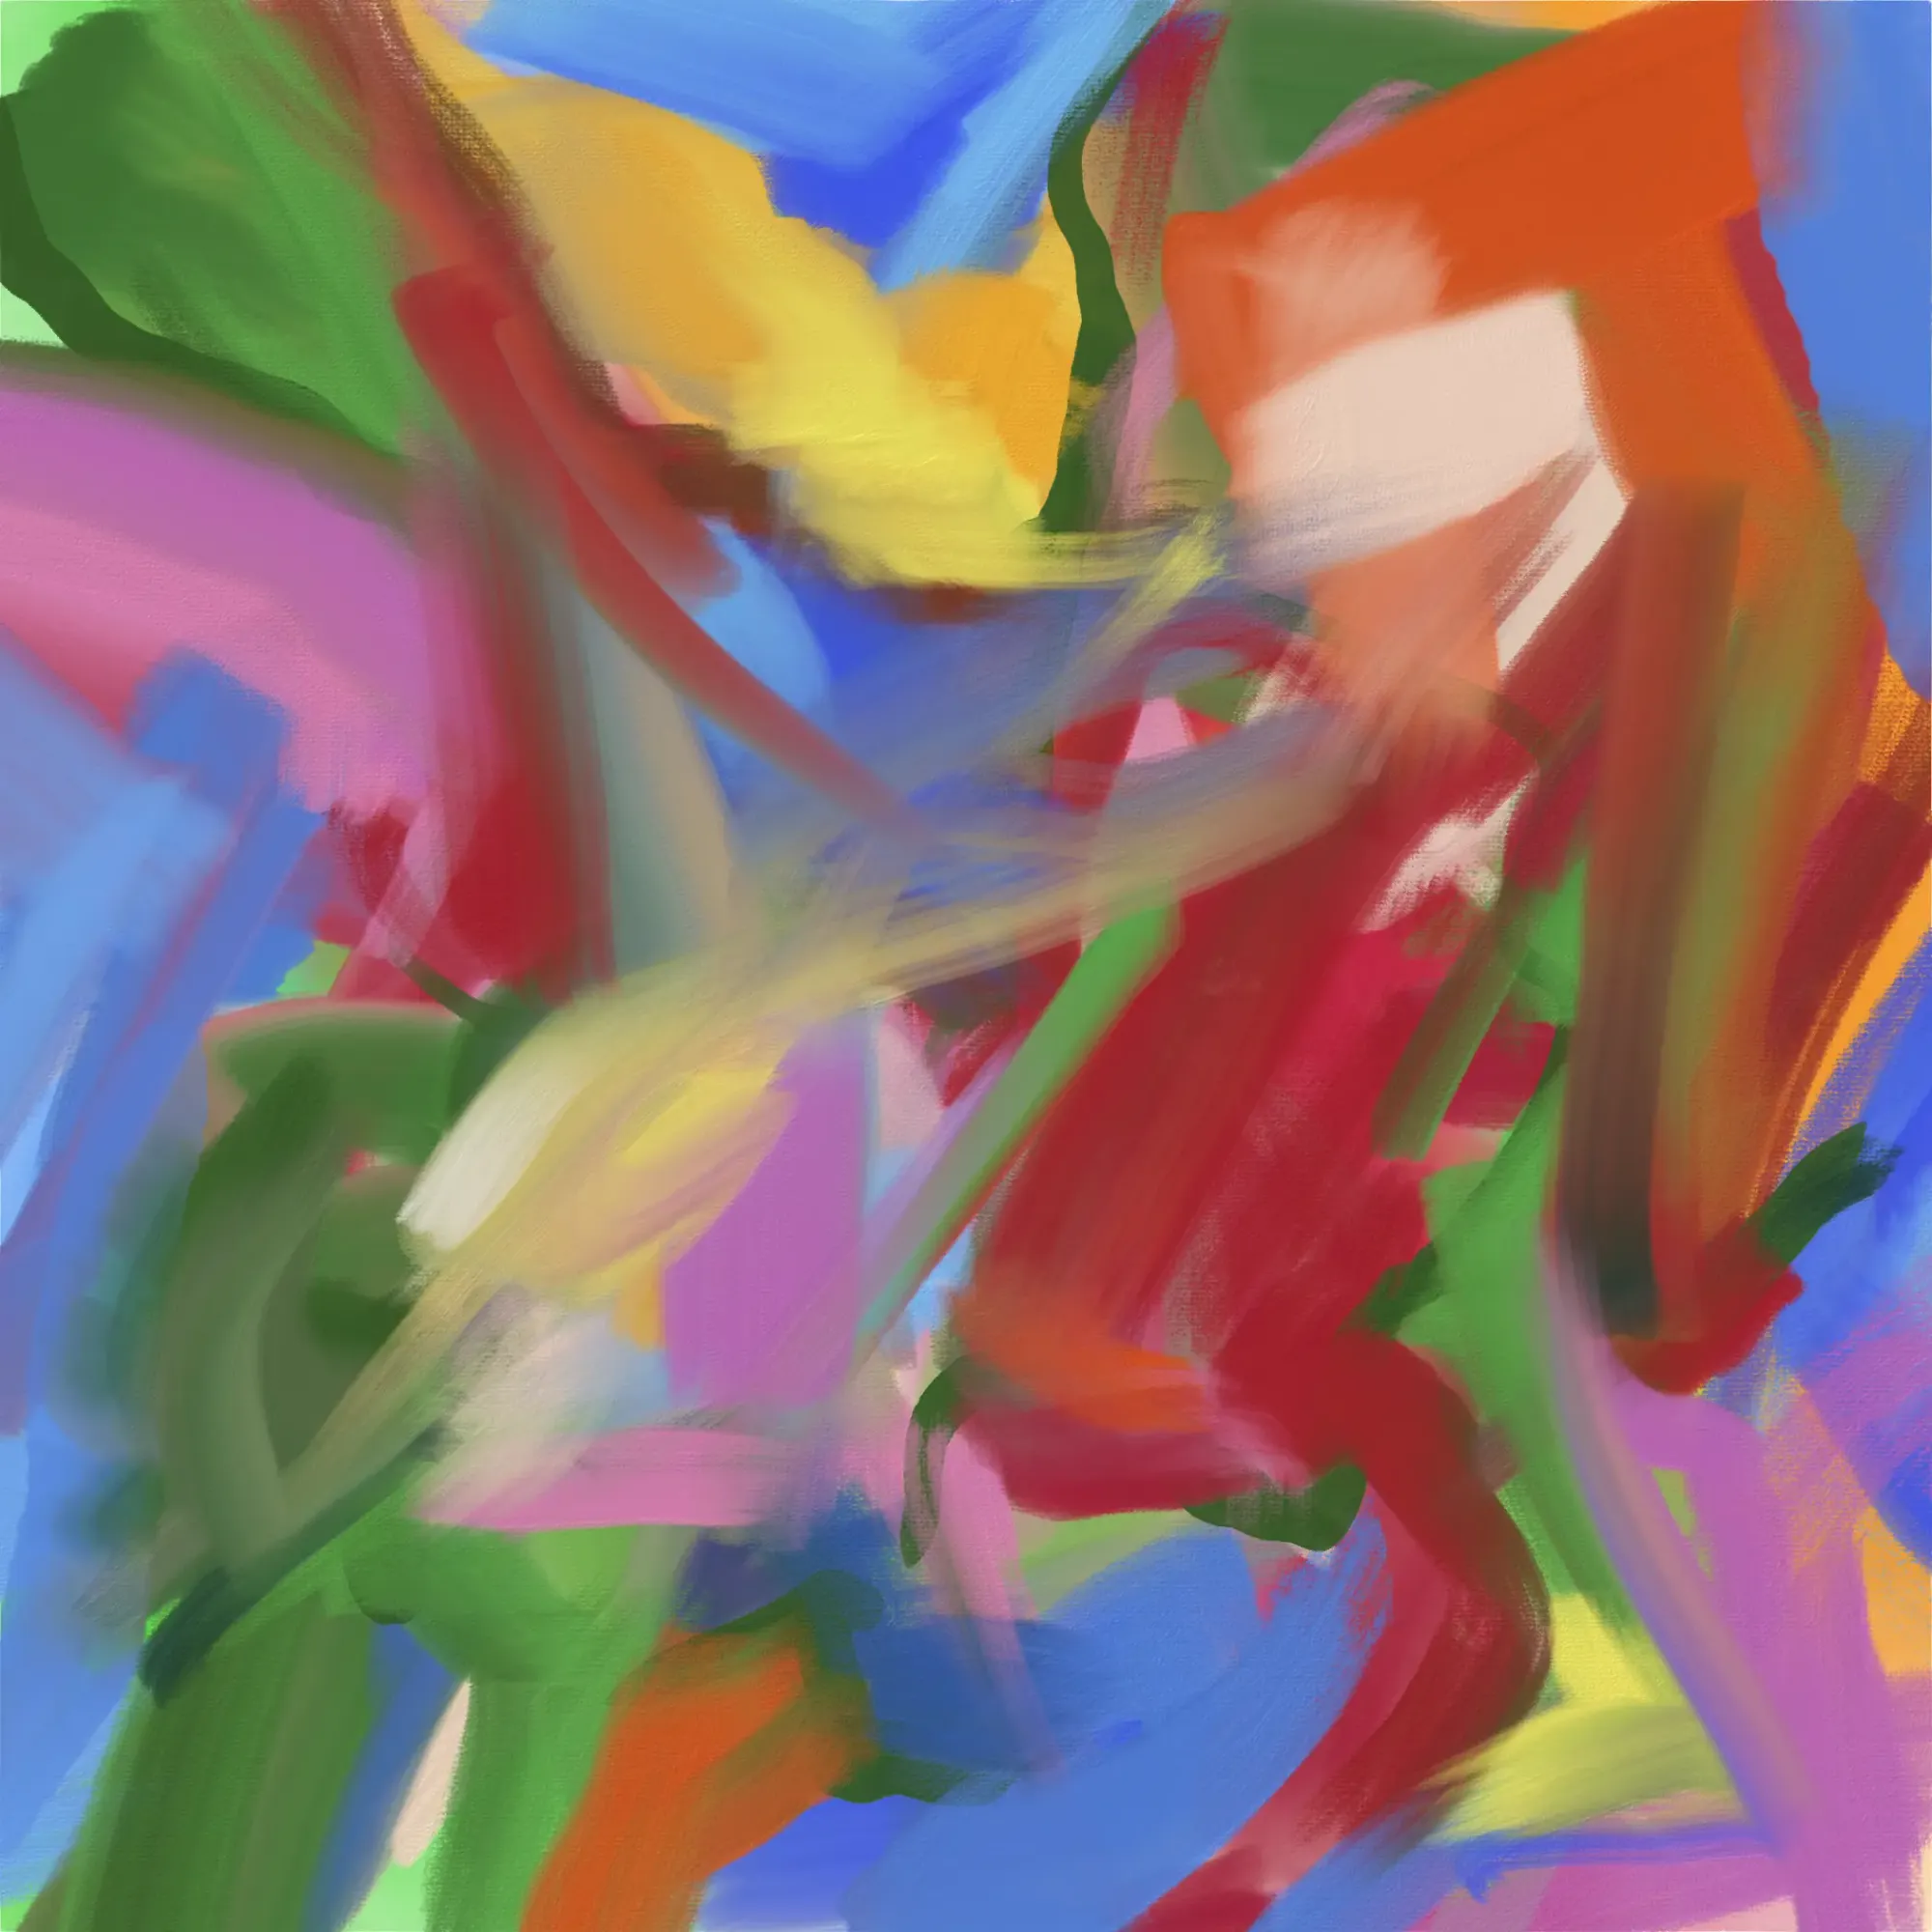 An abstract digital painting titled "Fallback 5," a square multi-colored composition.